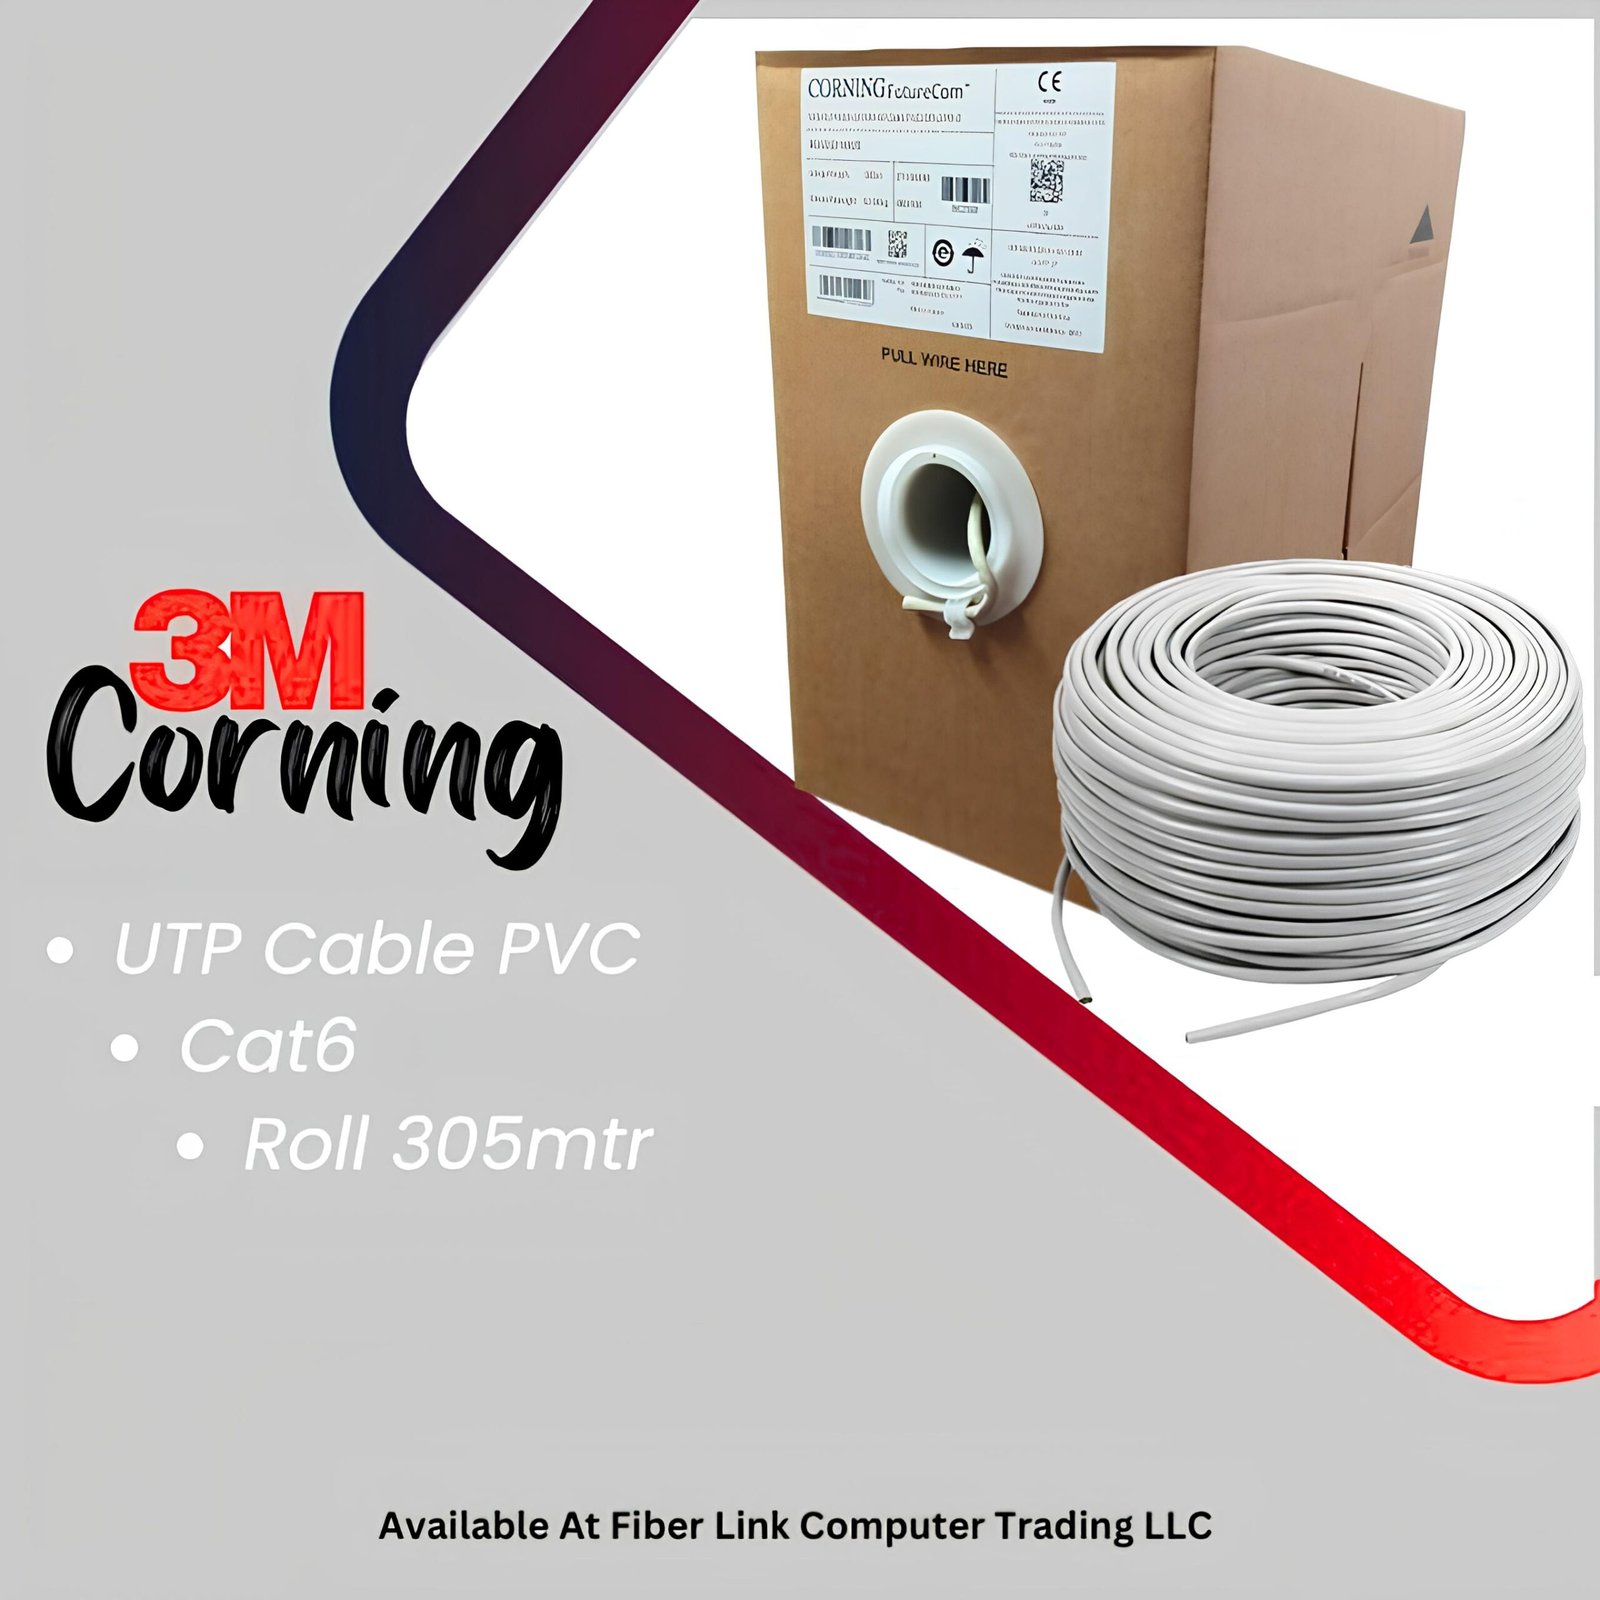 3M Corning CAT6 Cable Suppliers in UAE